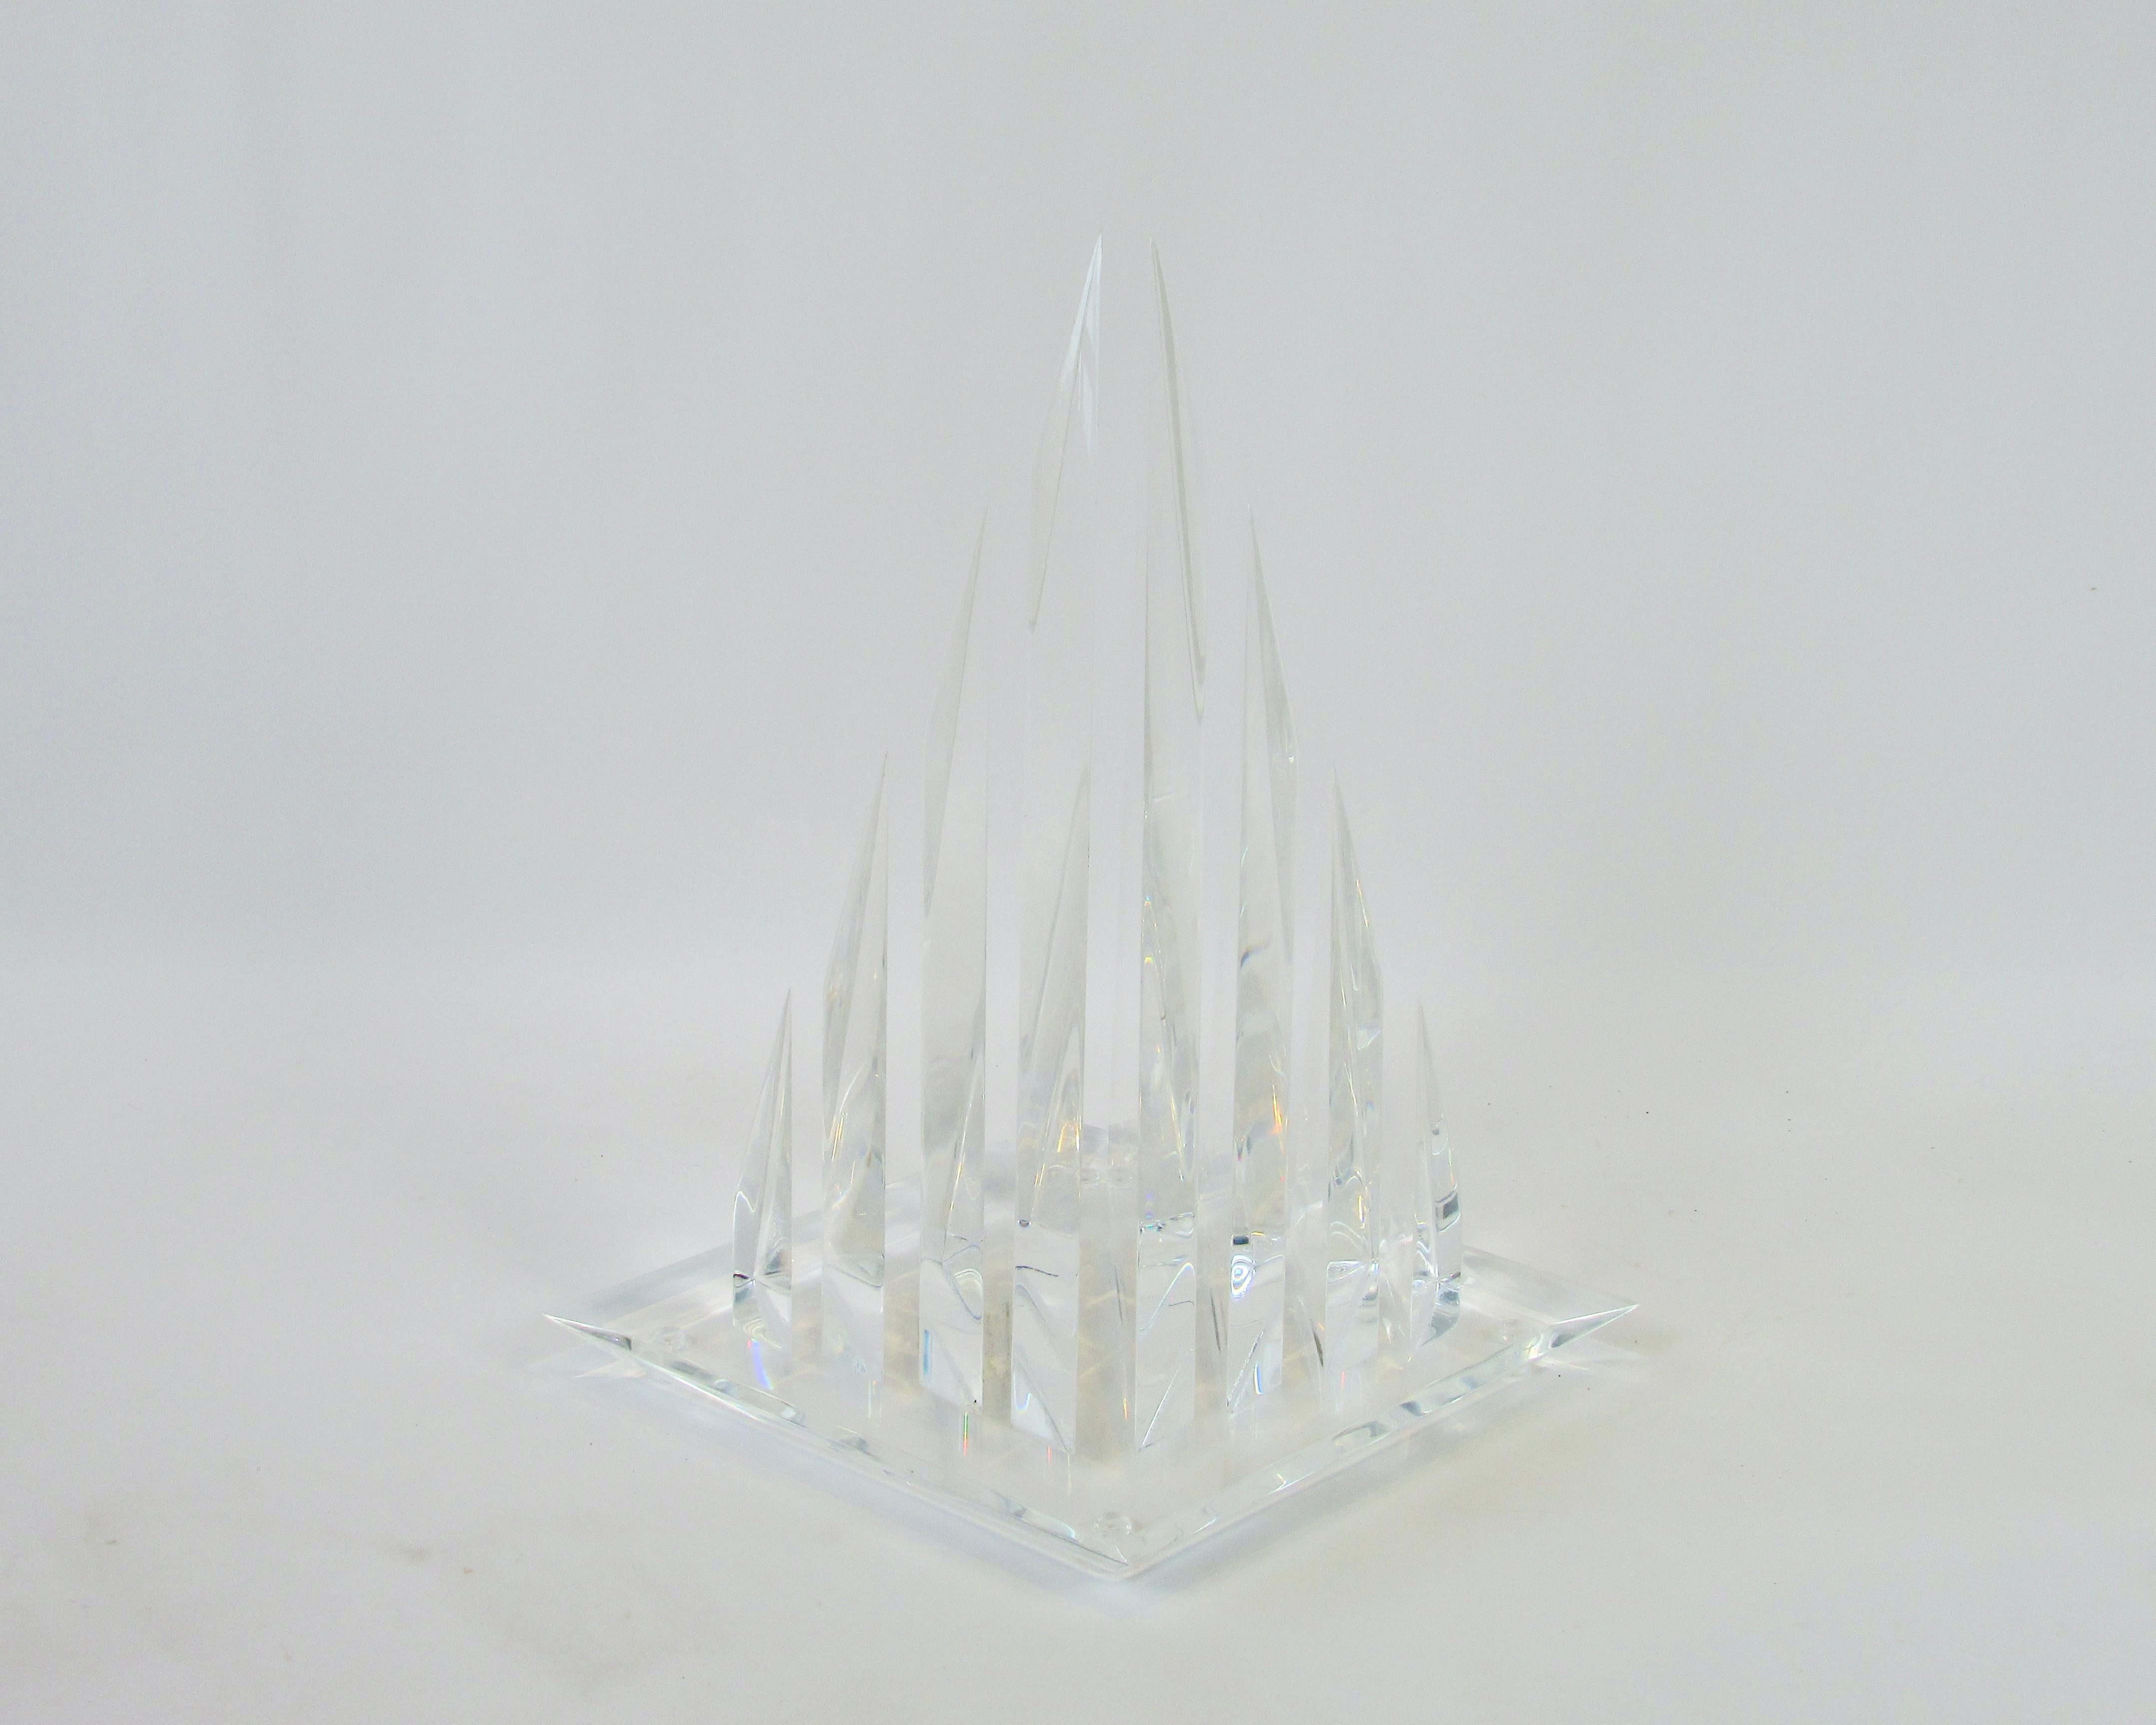 Hivo Van Teal Segmented Lucite Pyramid, Triangle Sculpture For Sale 5